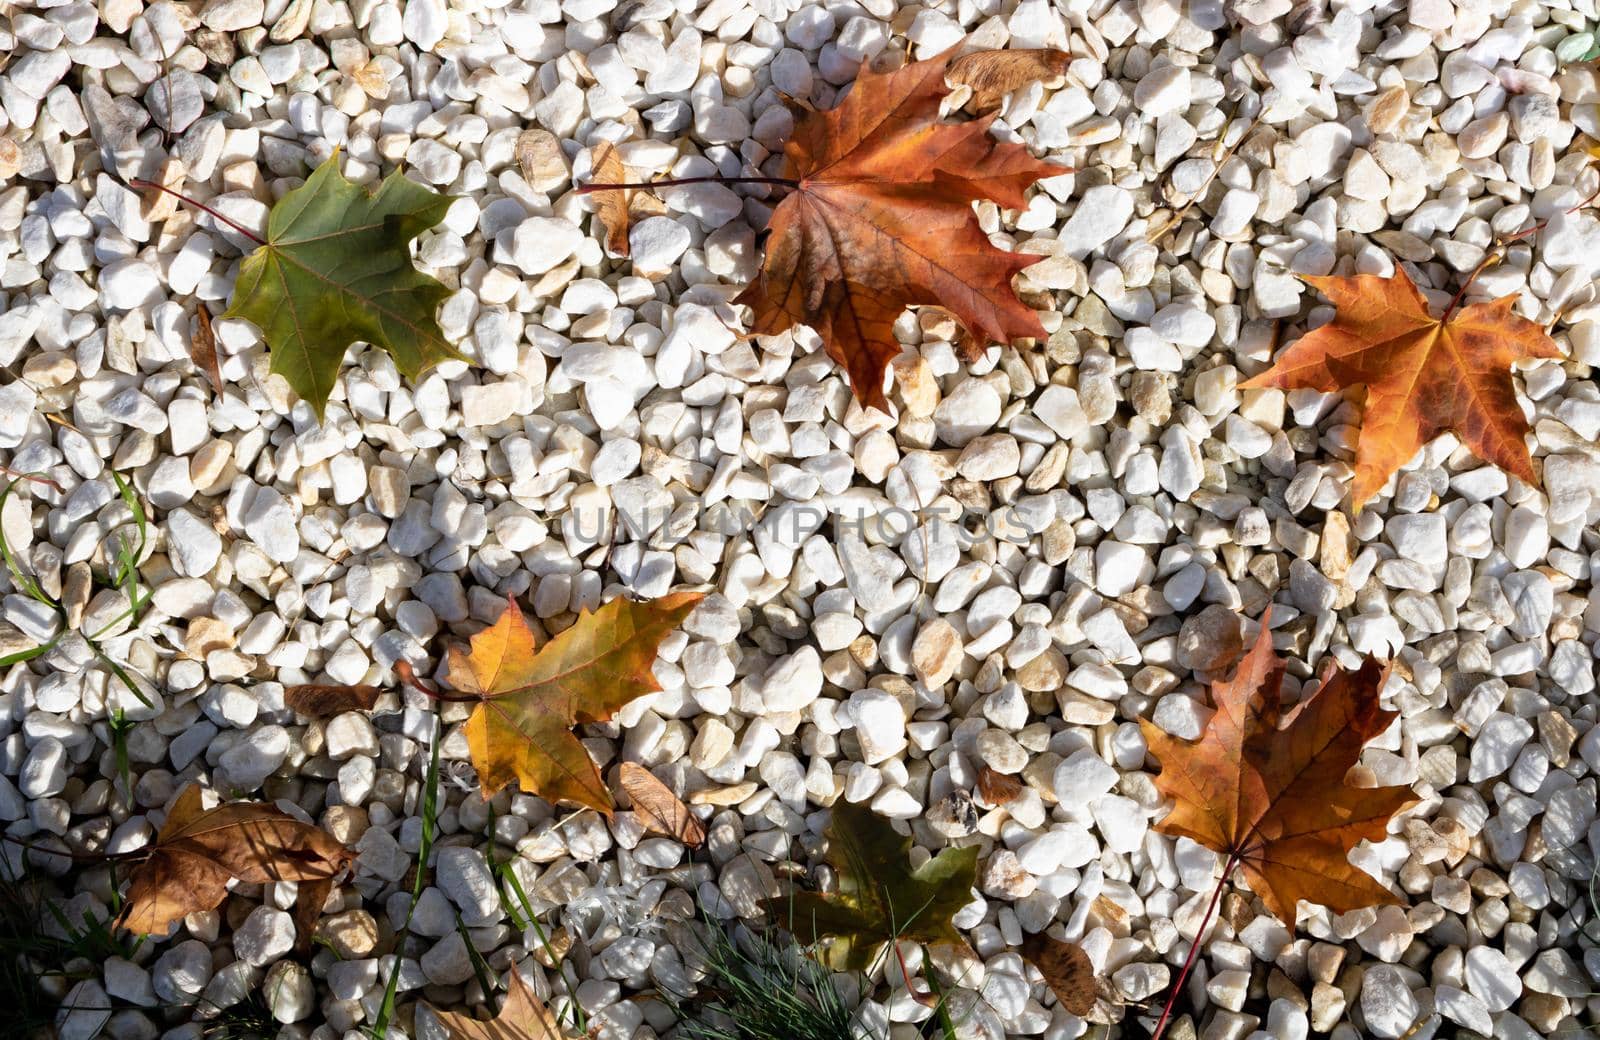 Fallen autumn leaves lie on white pebbles. Natural background of colorful foliage and stones. Top view by lapushka62